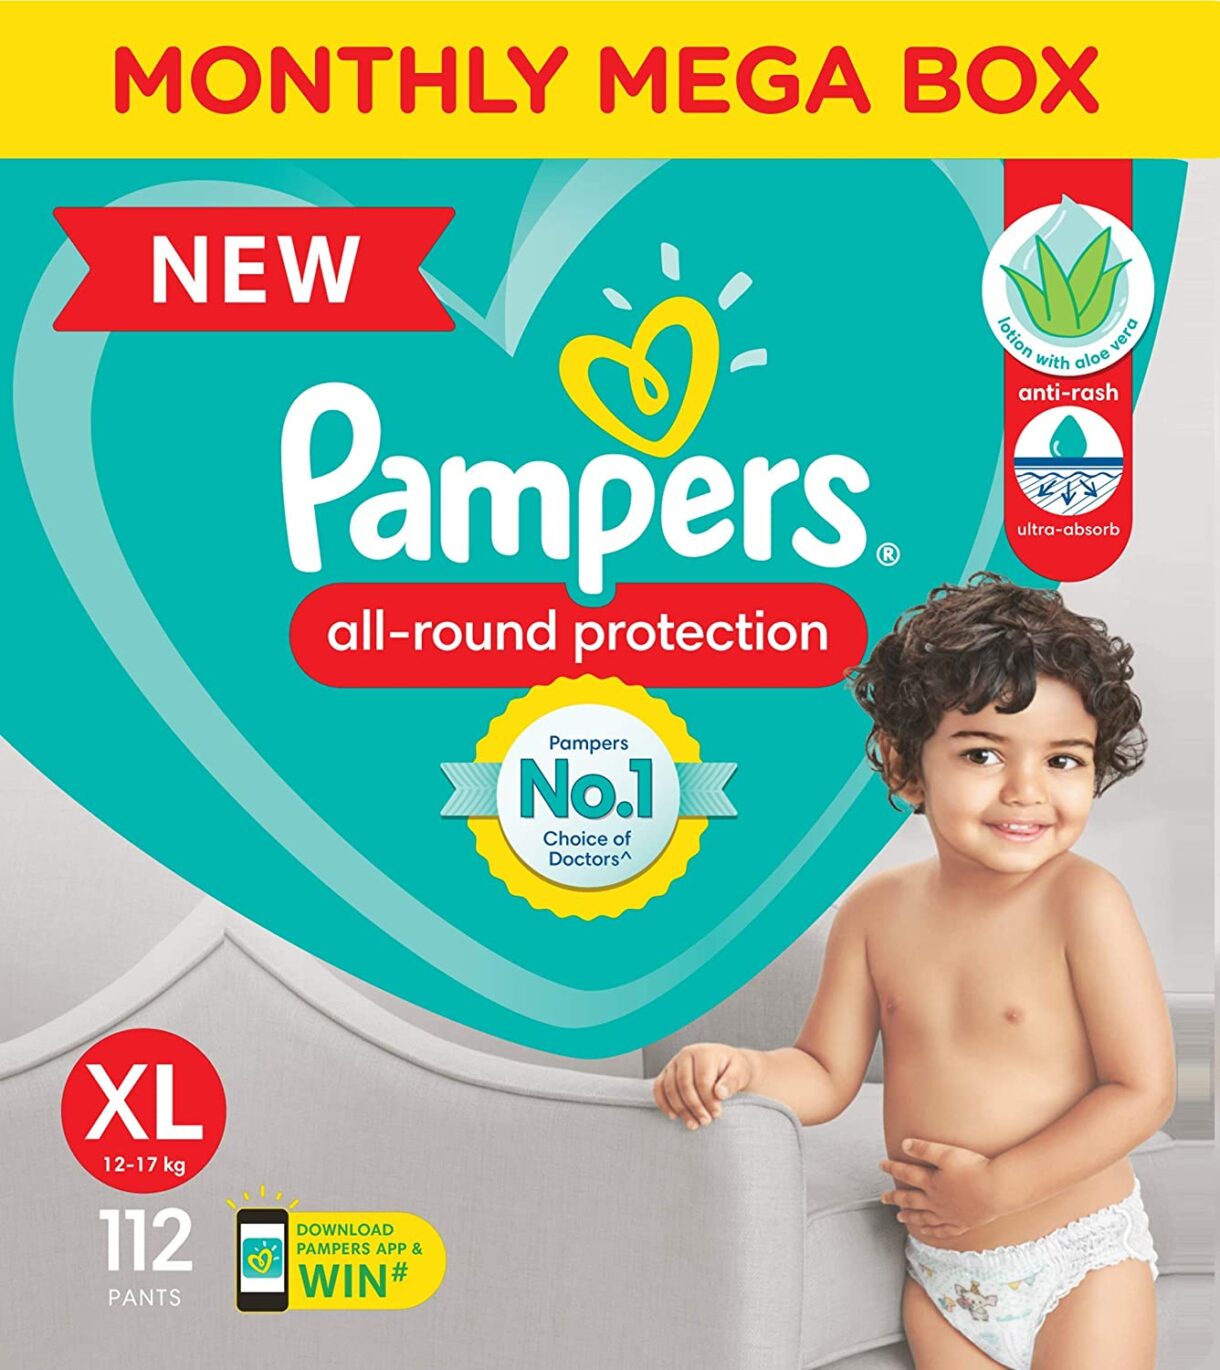 Pampers All round Protection Pants, Extra Large size baby diapers (XL) 112 Count